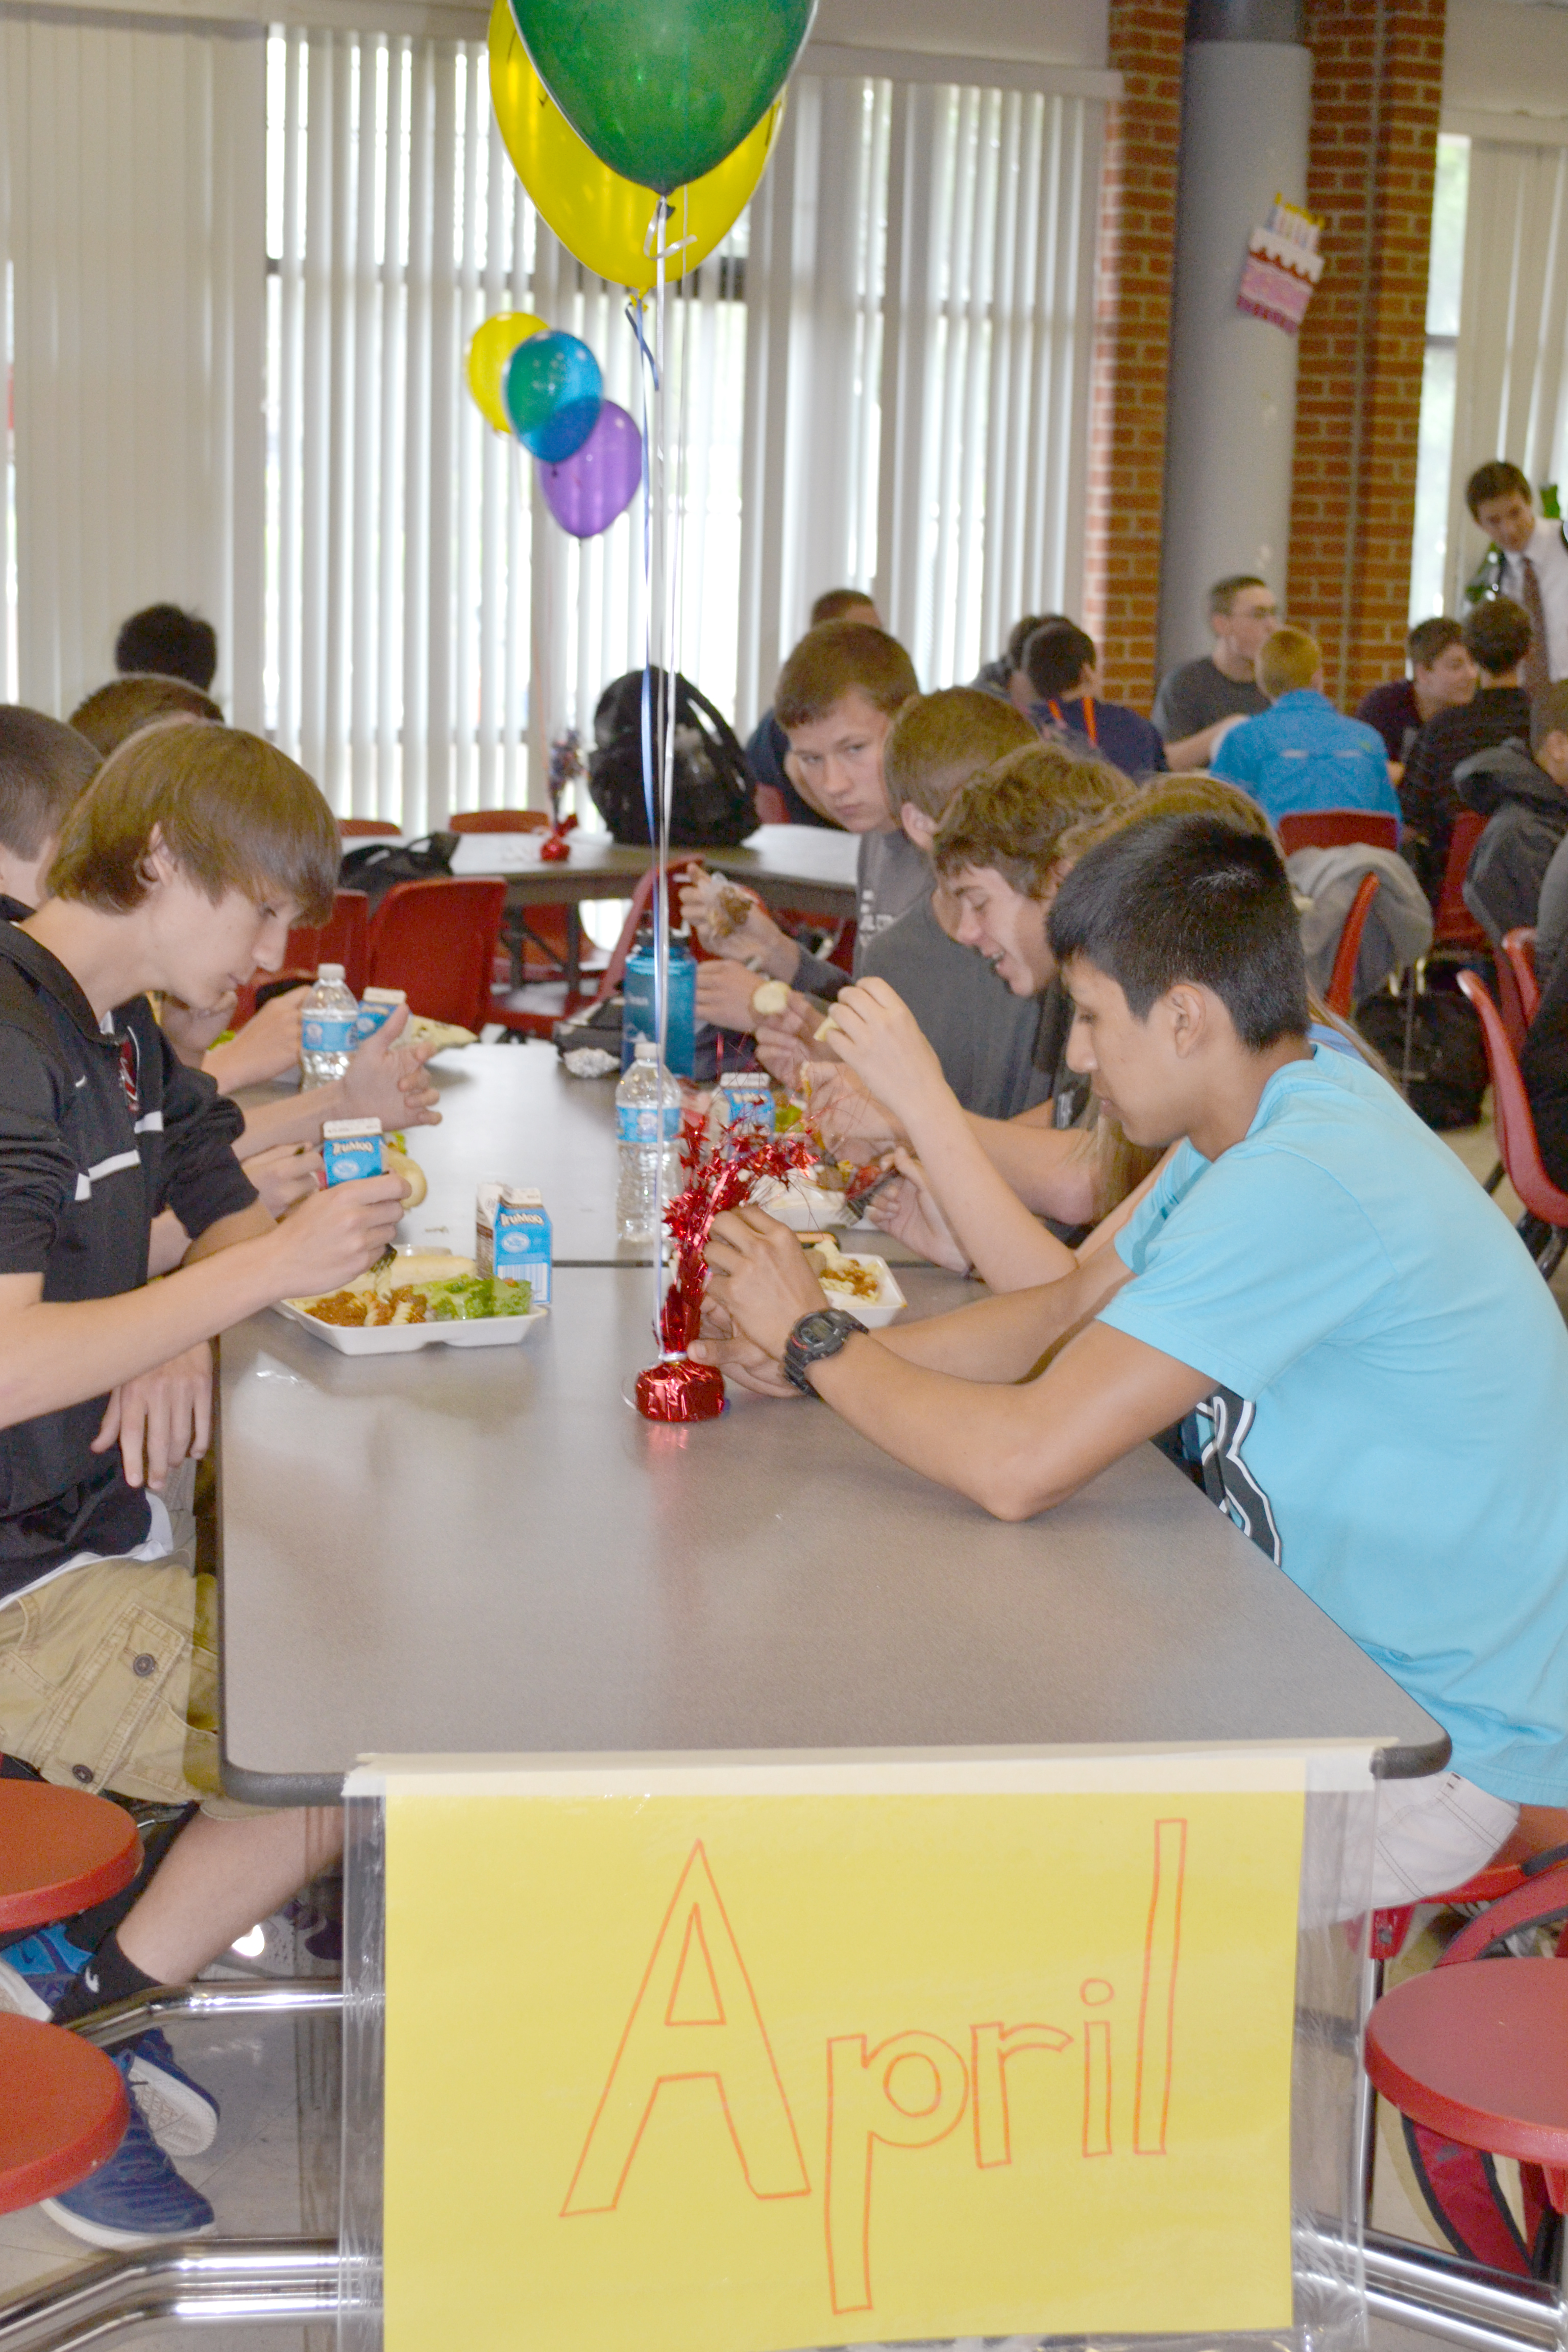 At Mix-It-Up Day, students enjoy new types of ethnic foods at lunch and talk to new friends that share their birth month.